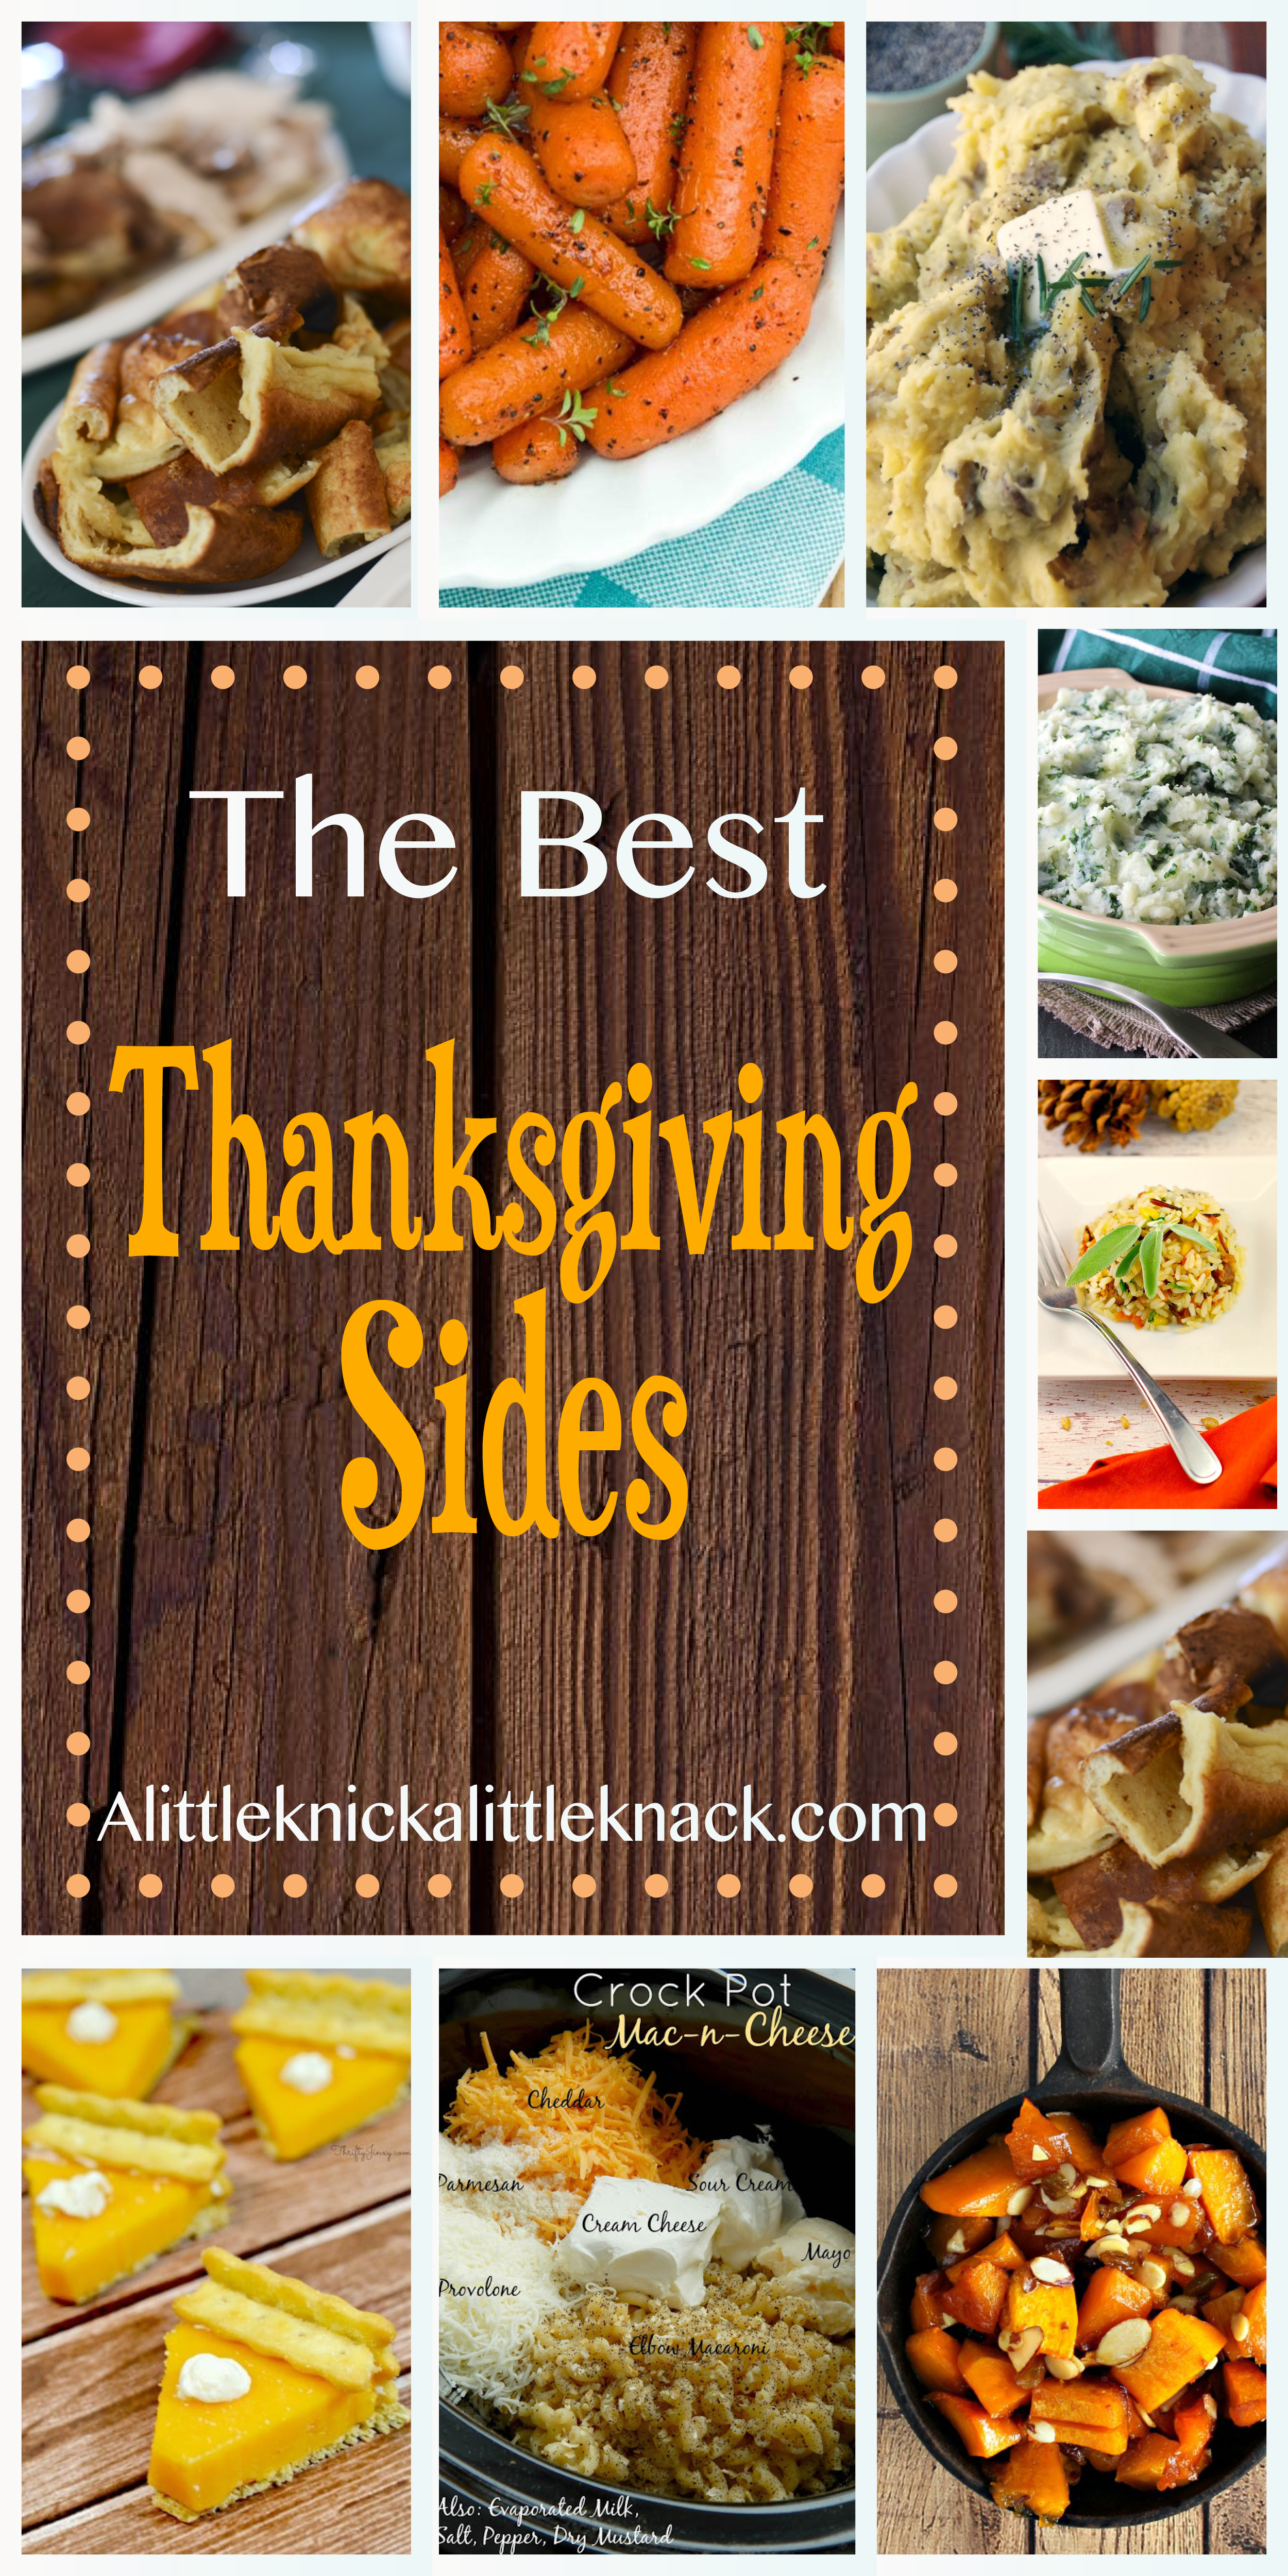 21 delicious Thanksgiving sides for when you have family over! #recipes